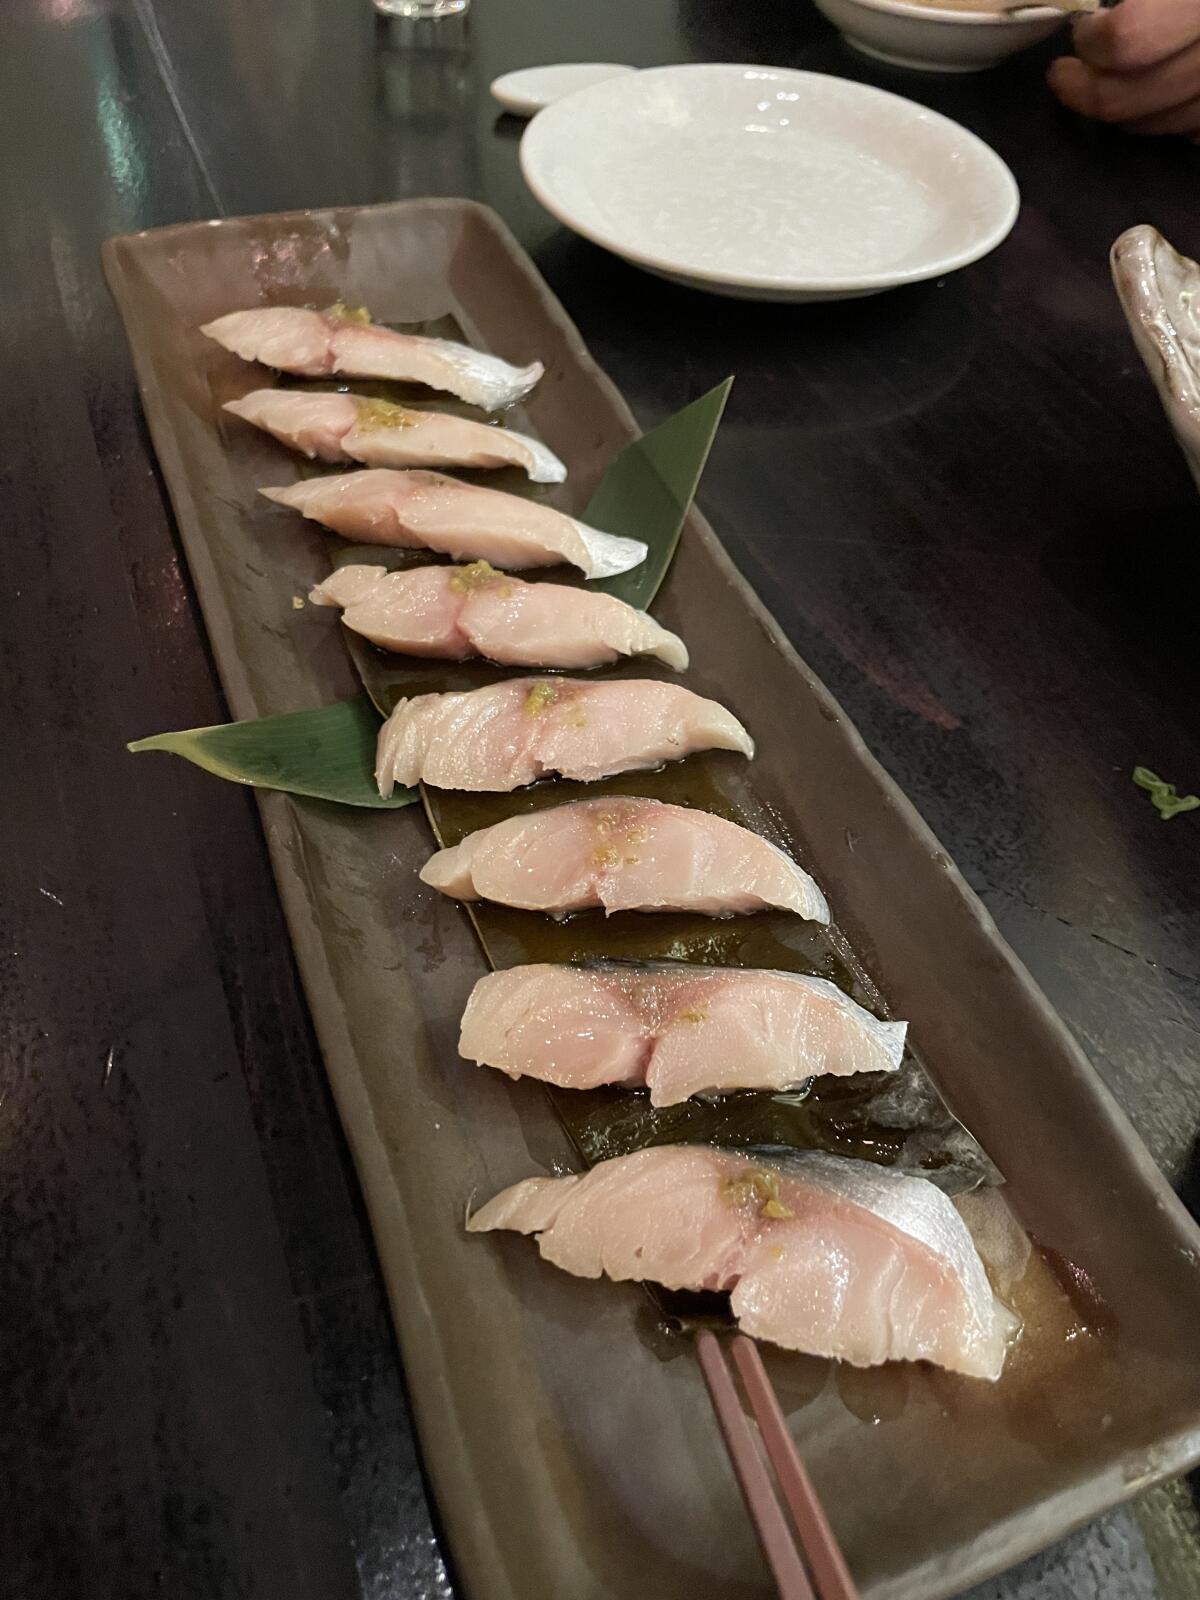 Slices of cured fish on a rectangular serving dish.